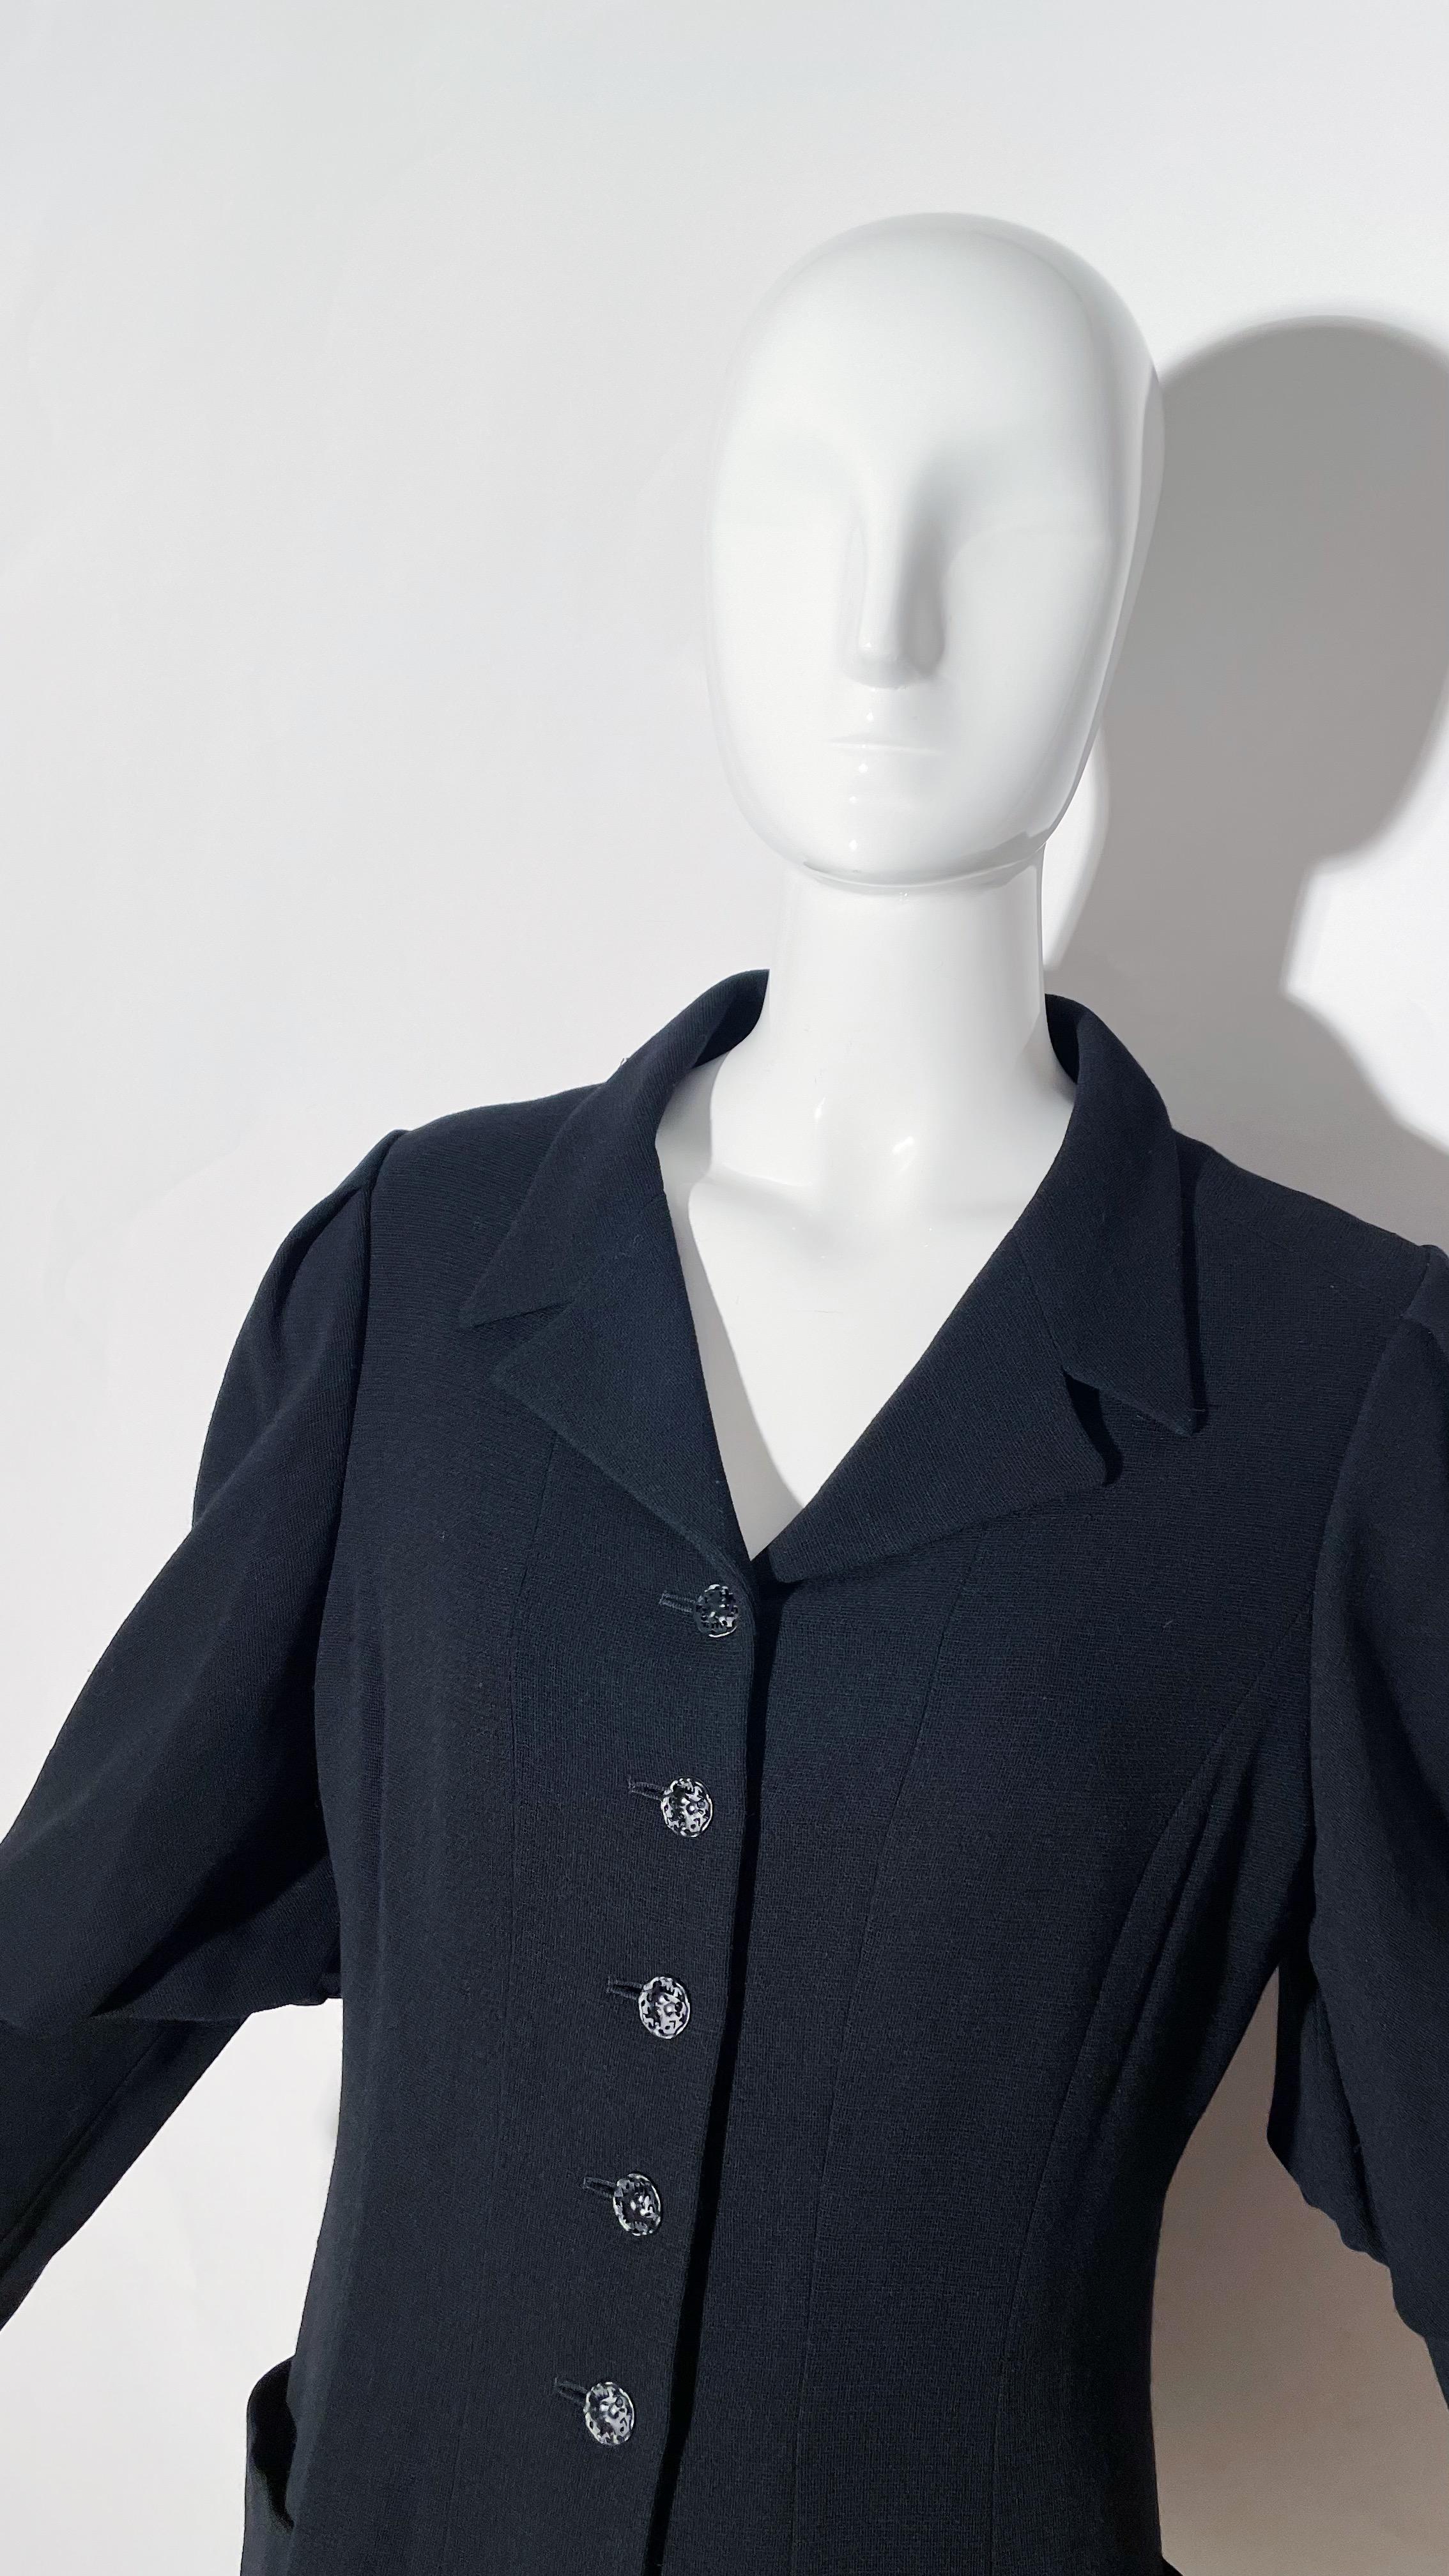 Chloe Black Blazer with Dramatic Sleeves  In Excellent Condition For Sale In Waterford, MI